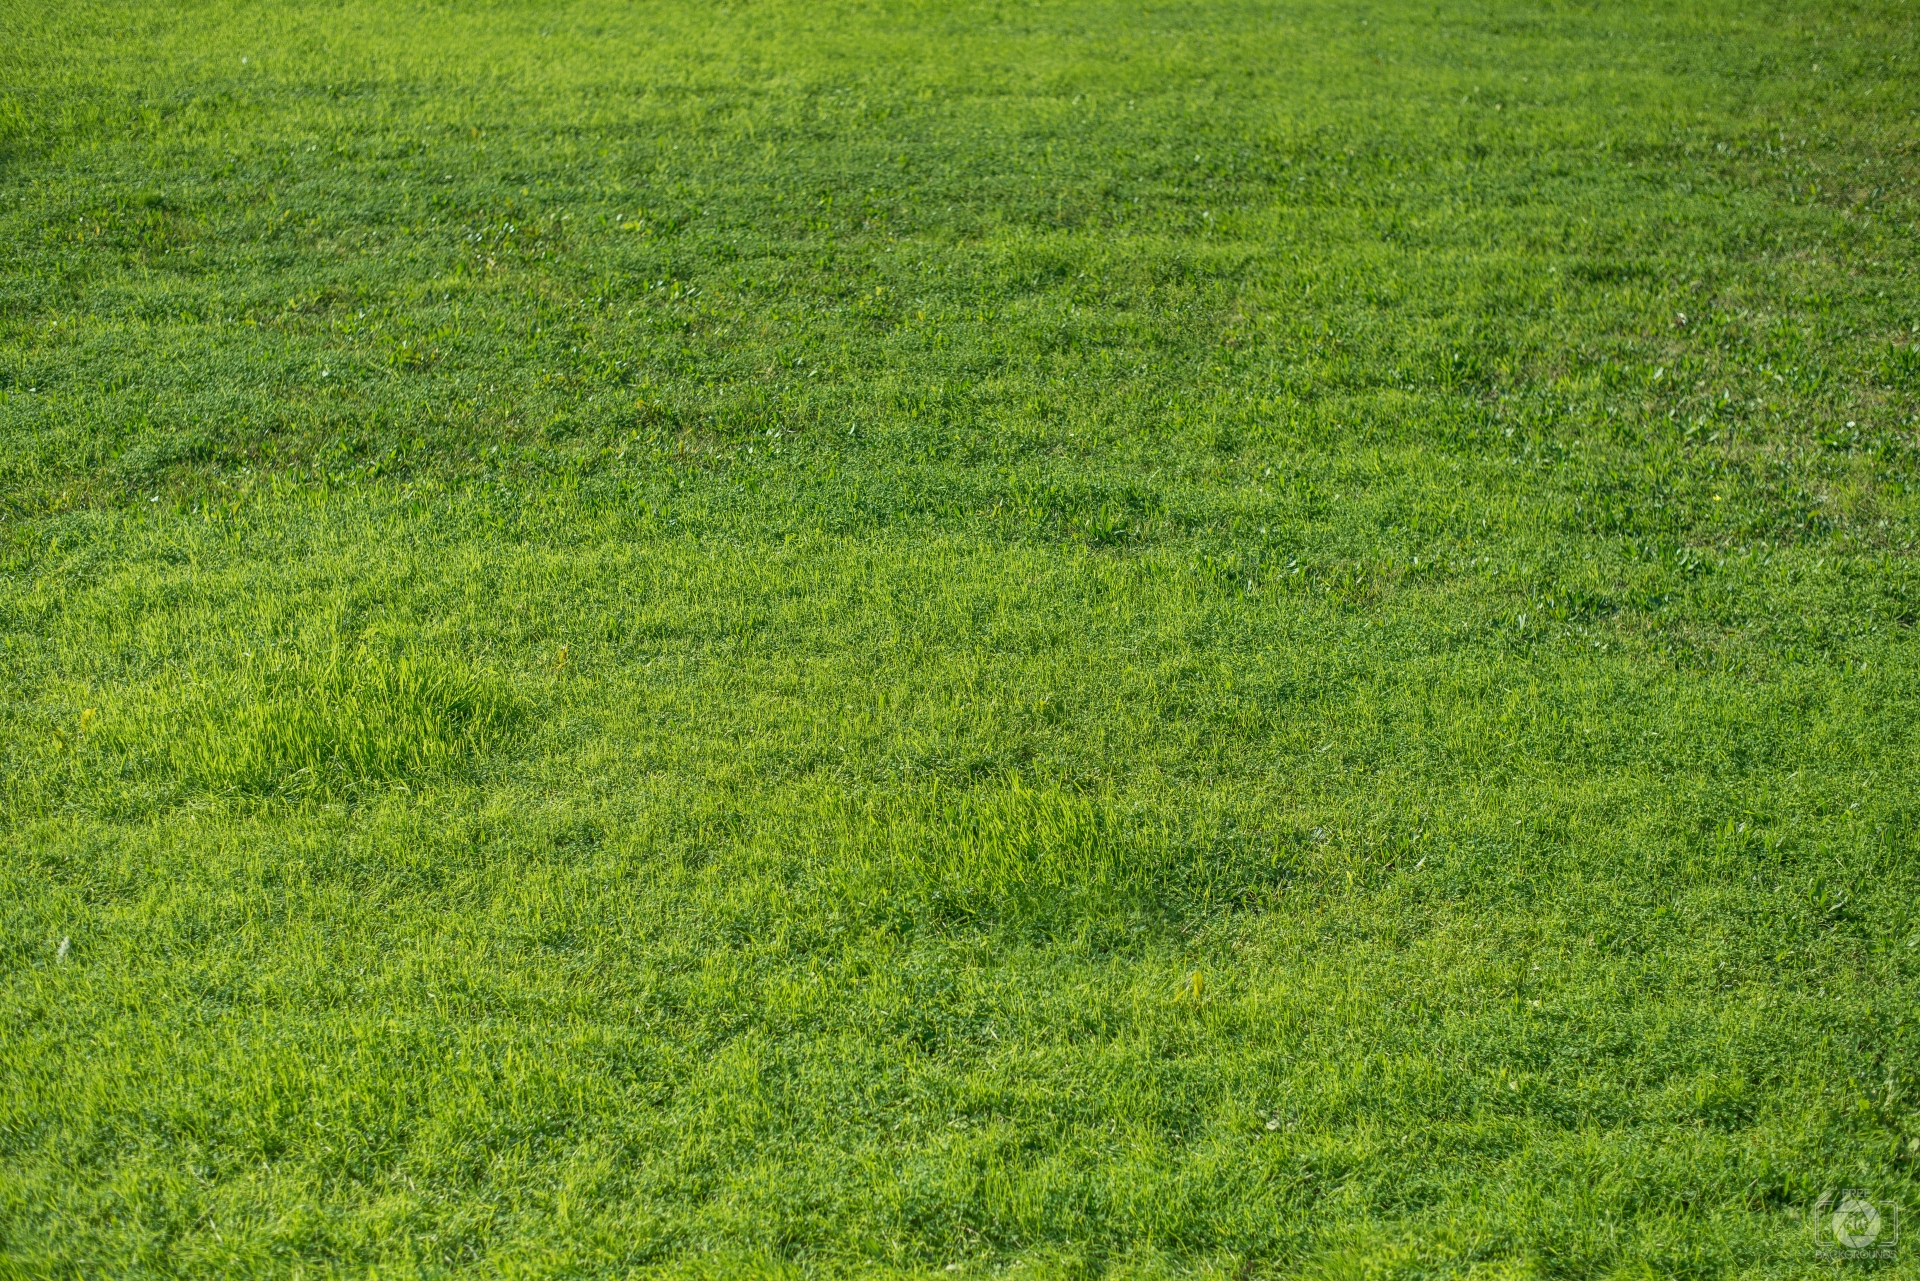 Free photo: Grass Texture, Green, Gritty